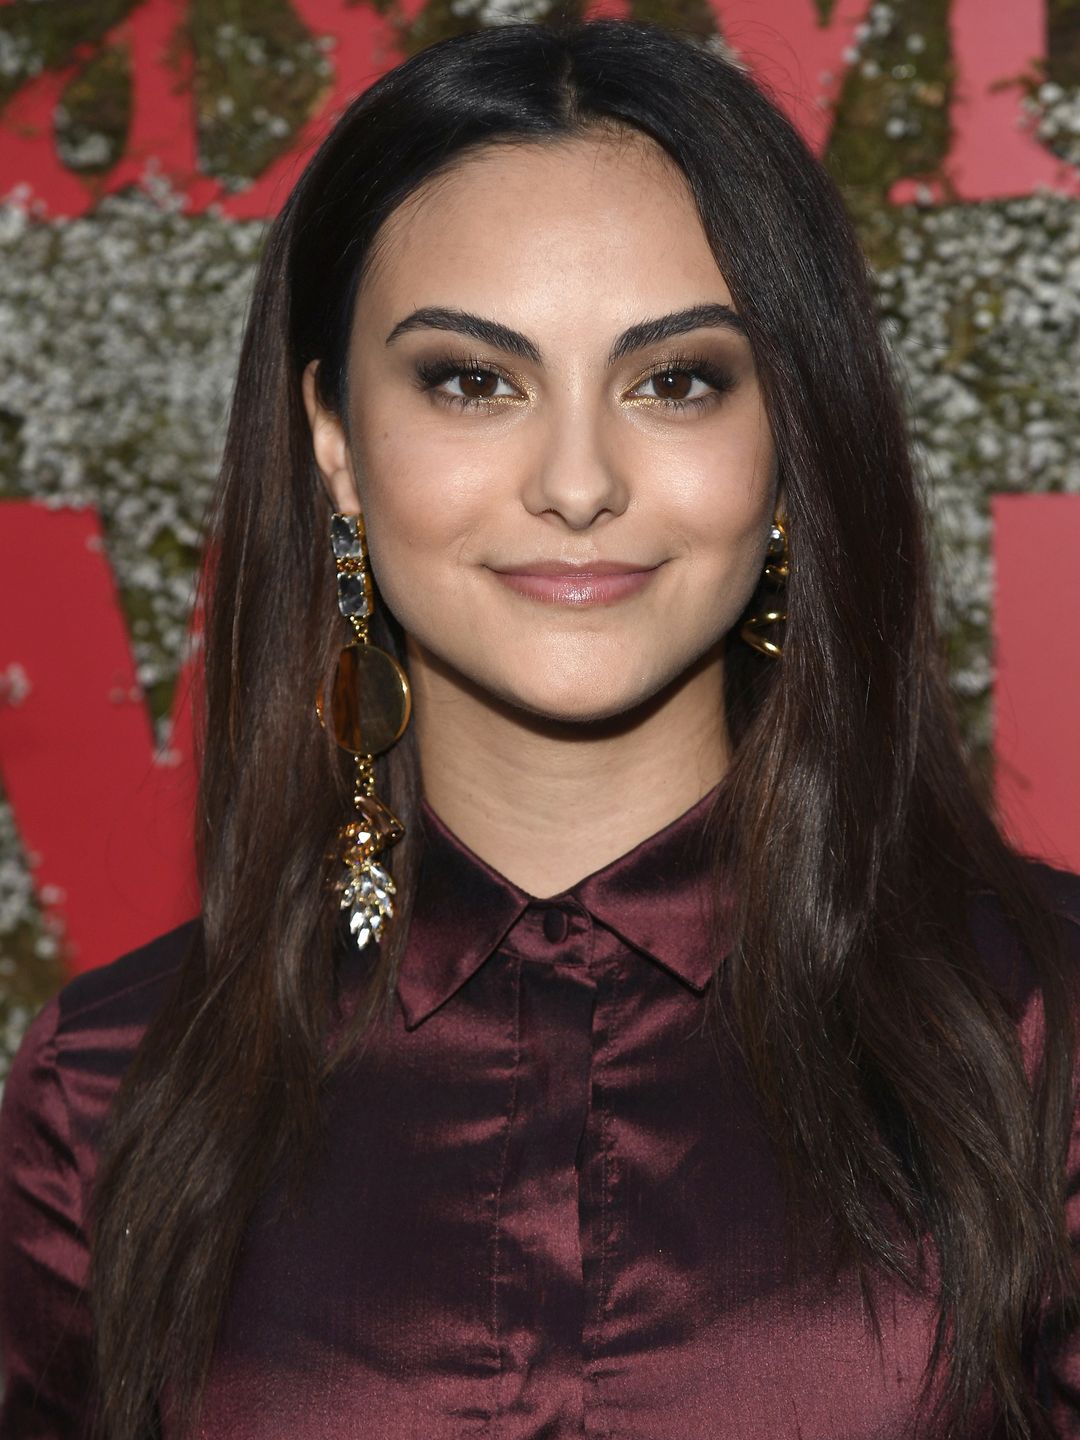 Camila Mendes how did she became famous